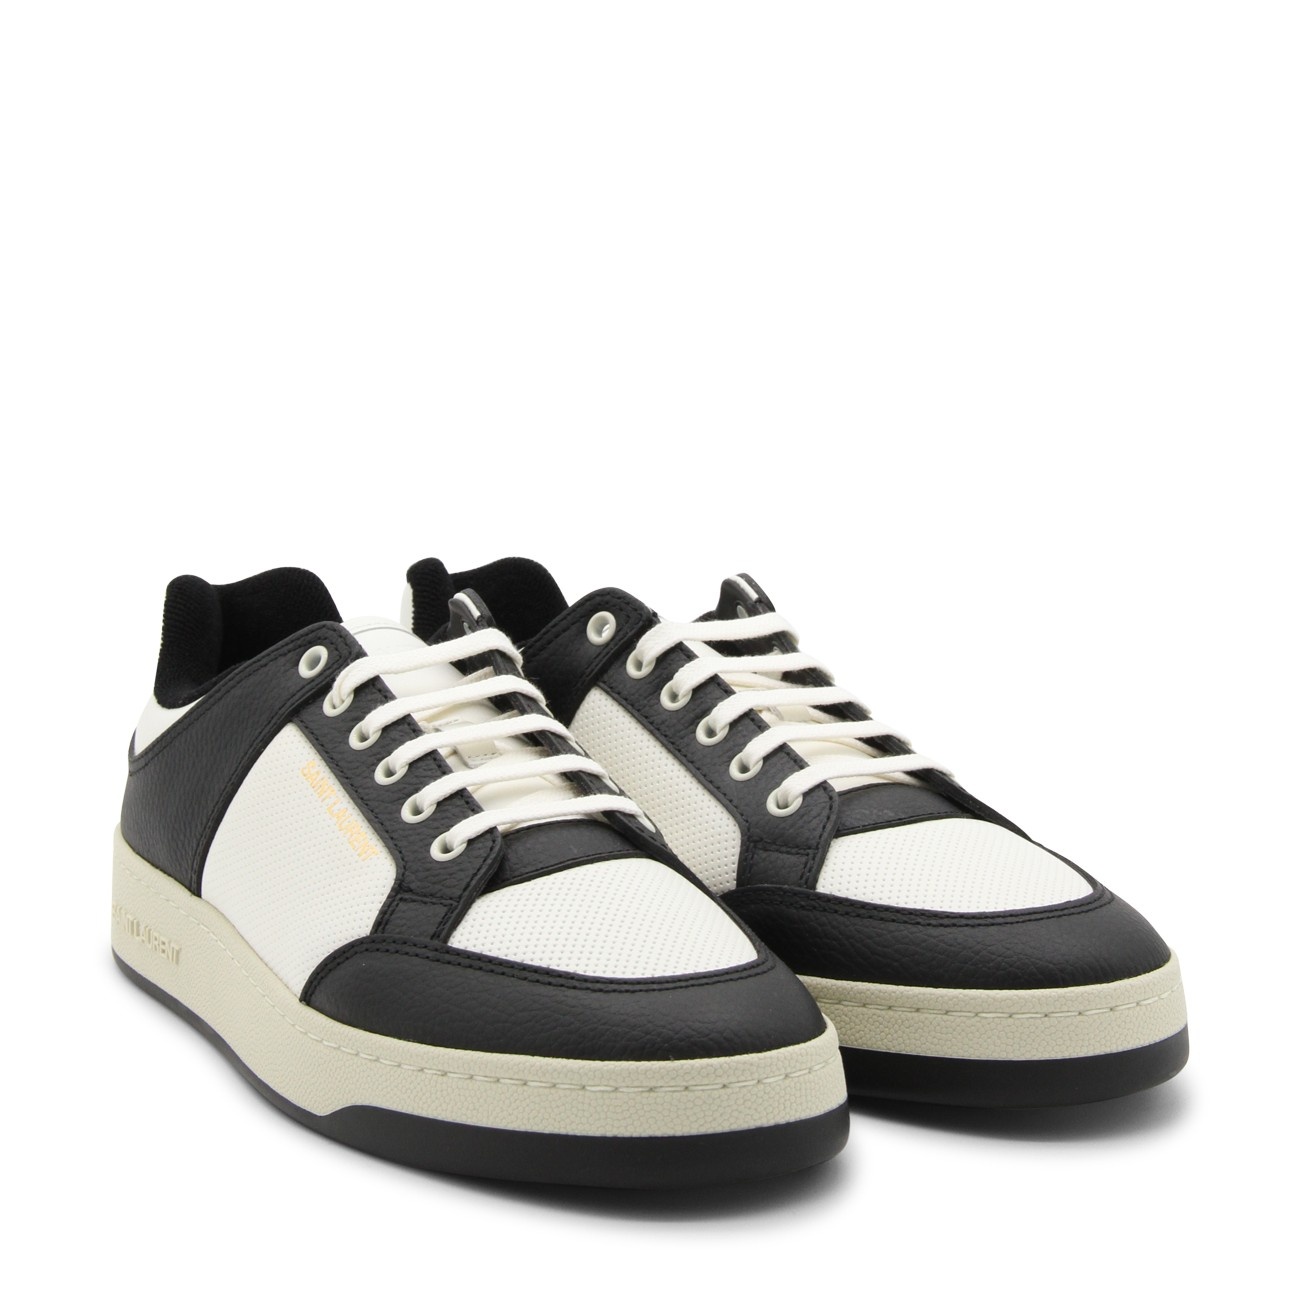 black and white leather sneakers - 2